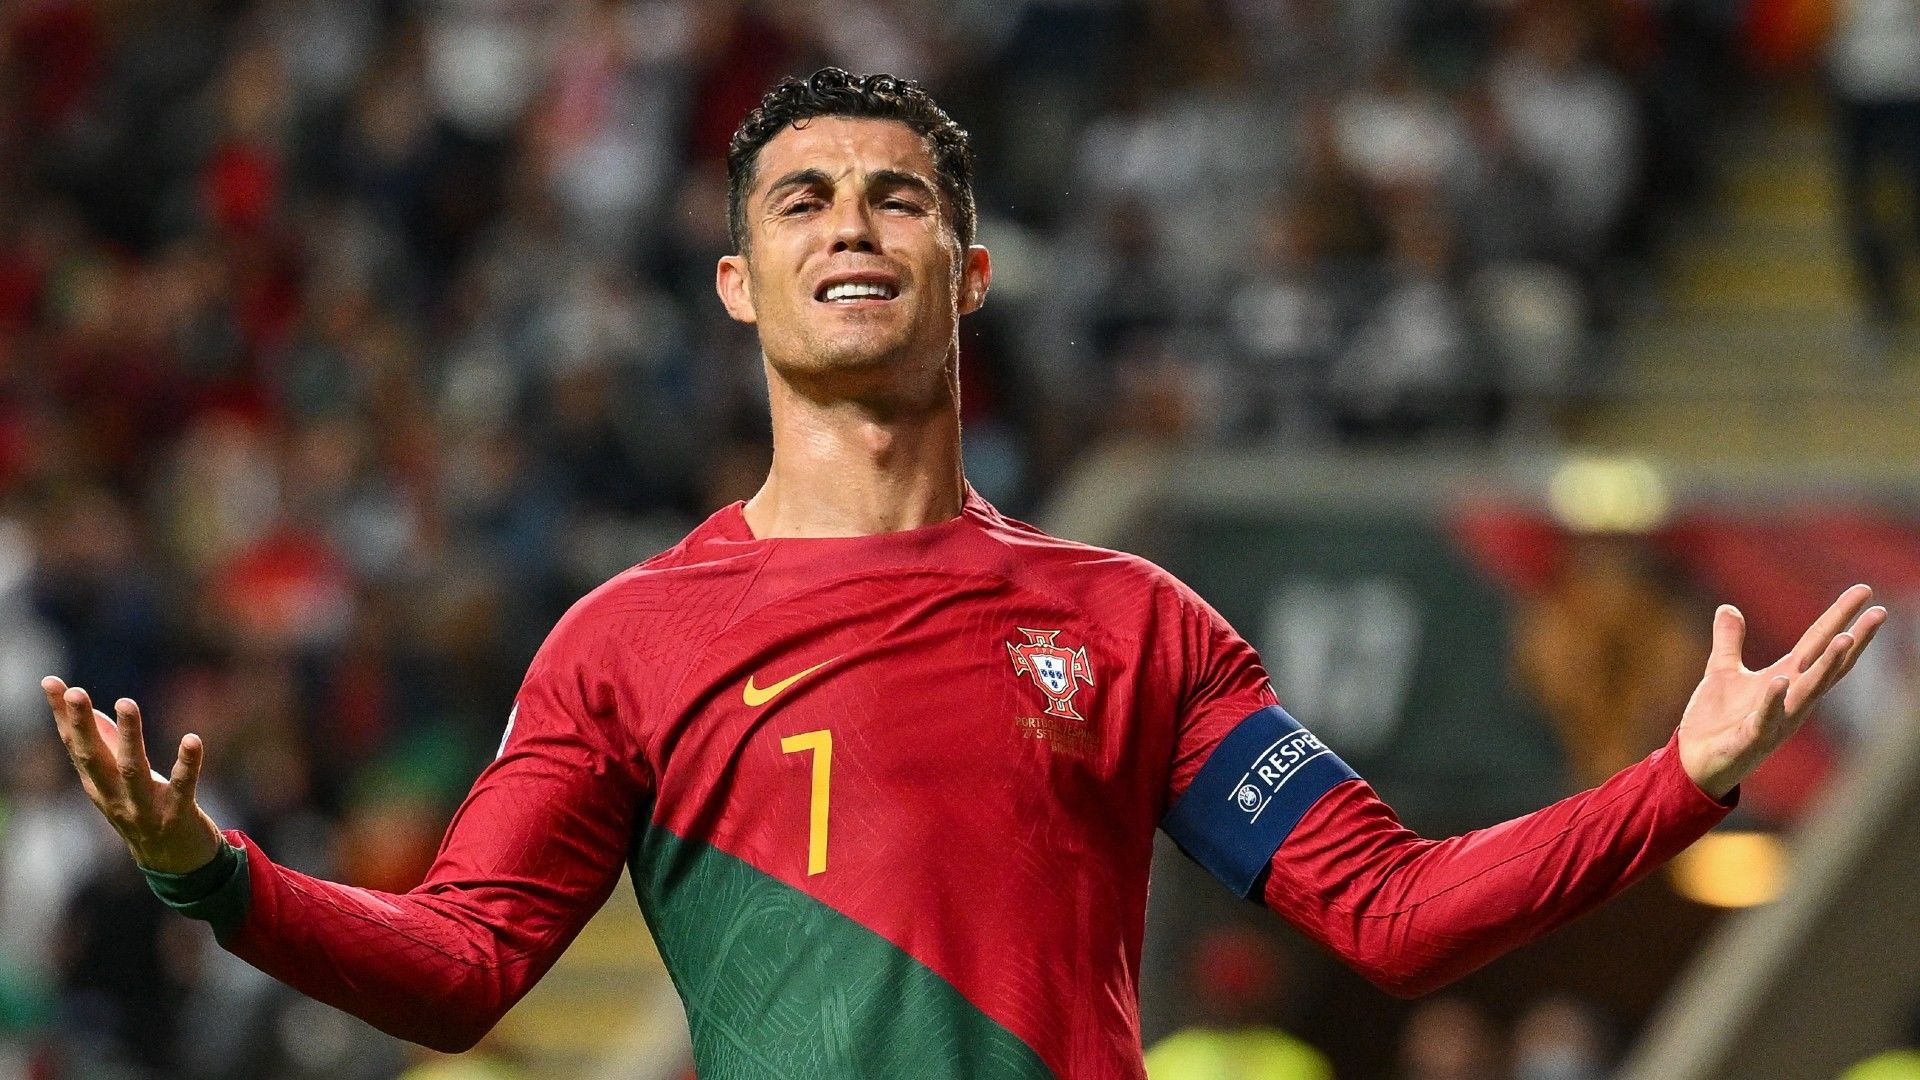 Cristiano Ronaldo becomes the first user with 500 million subscribers on Instagram